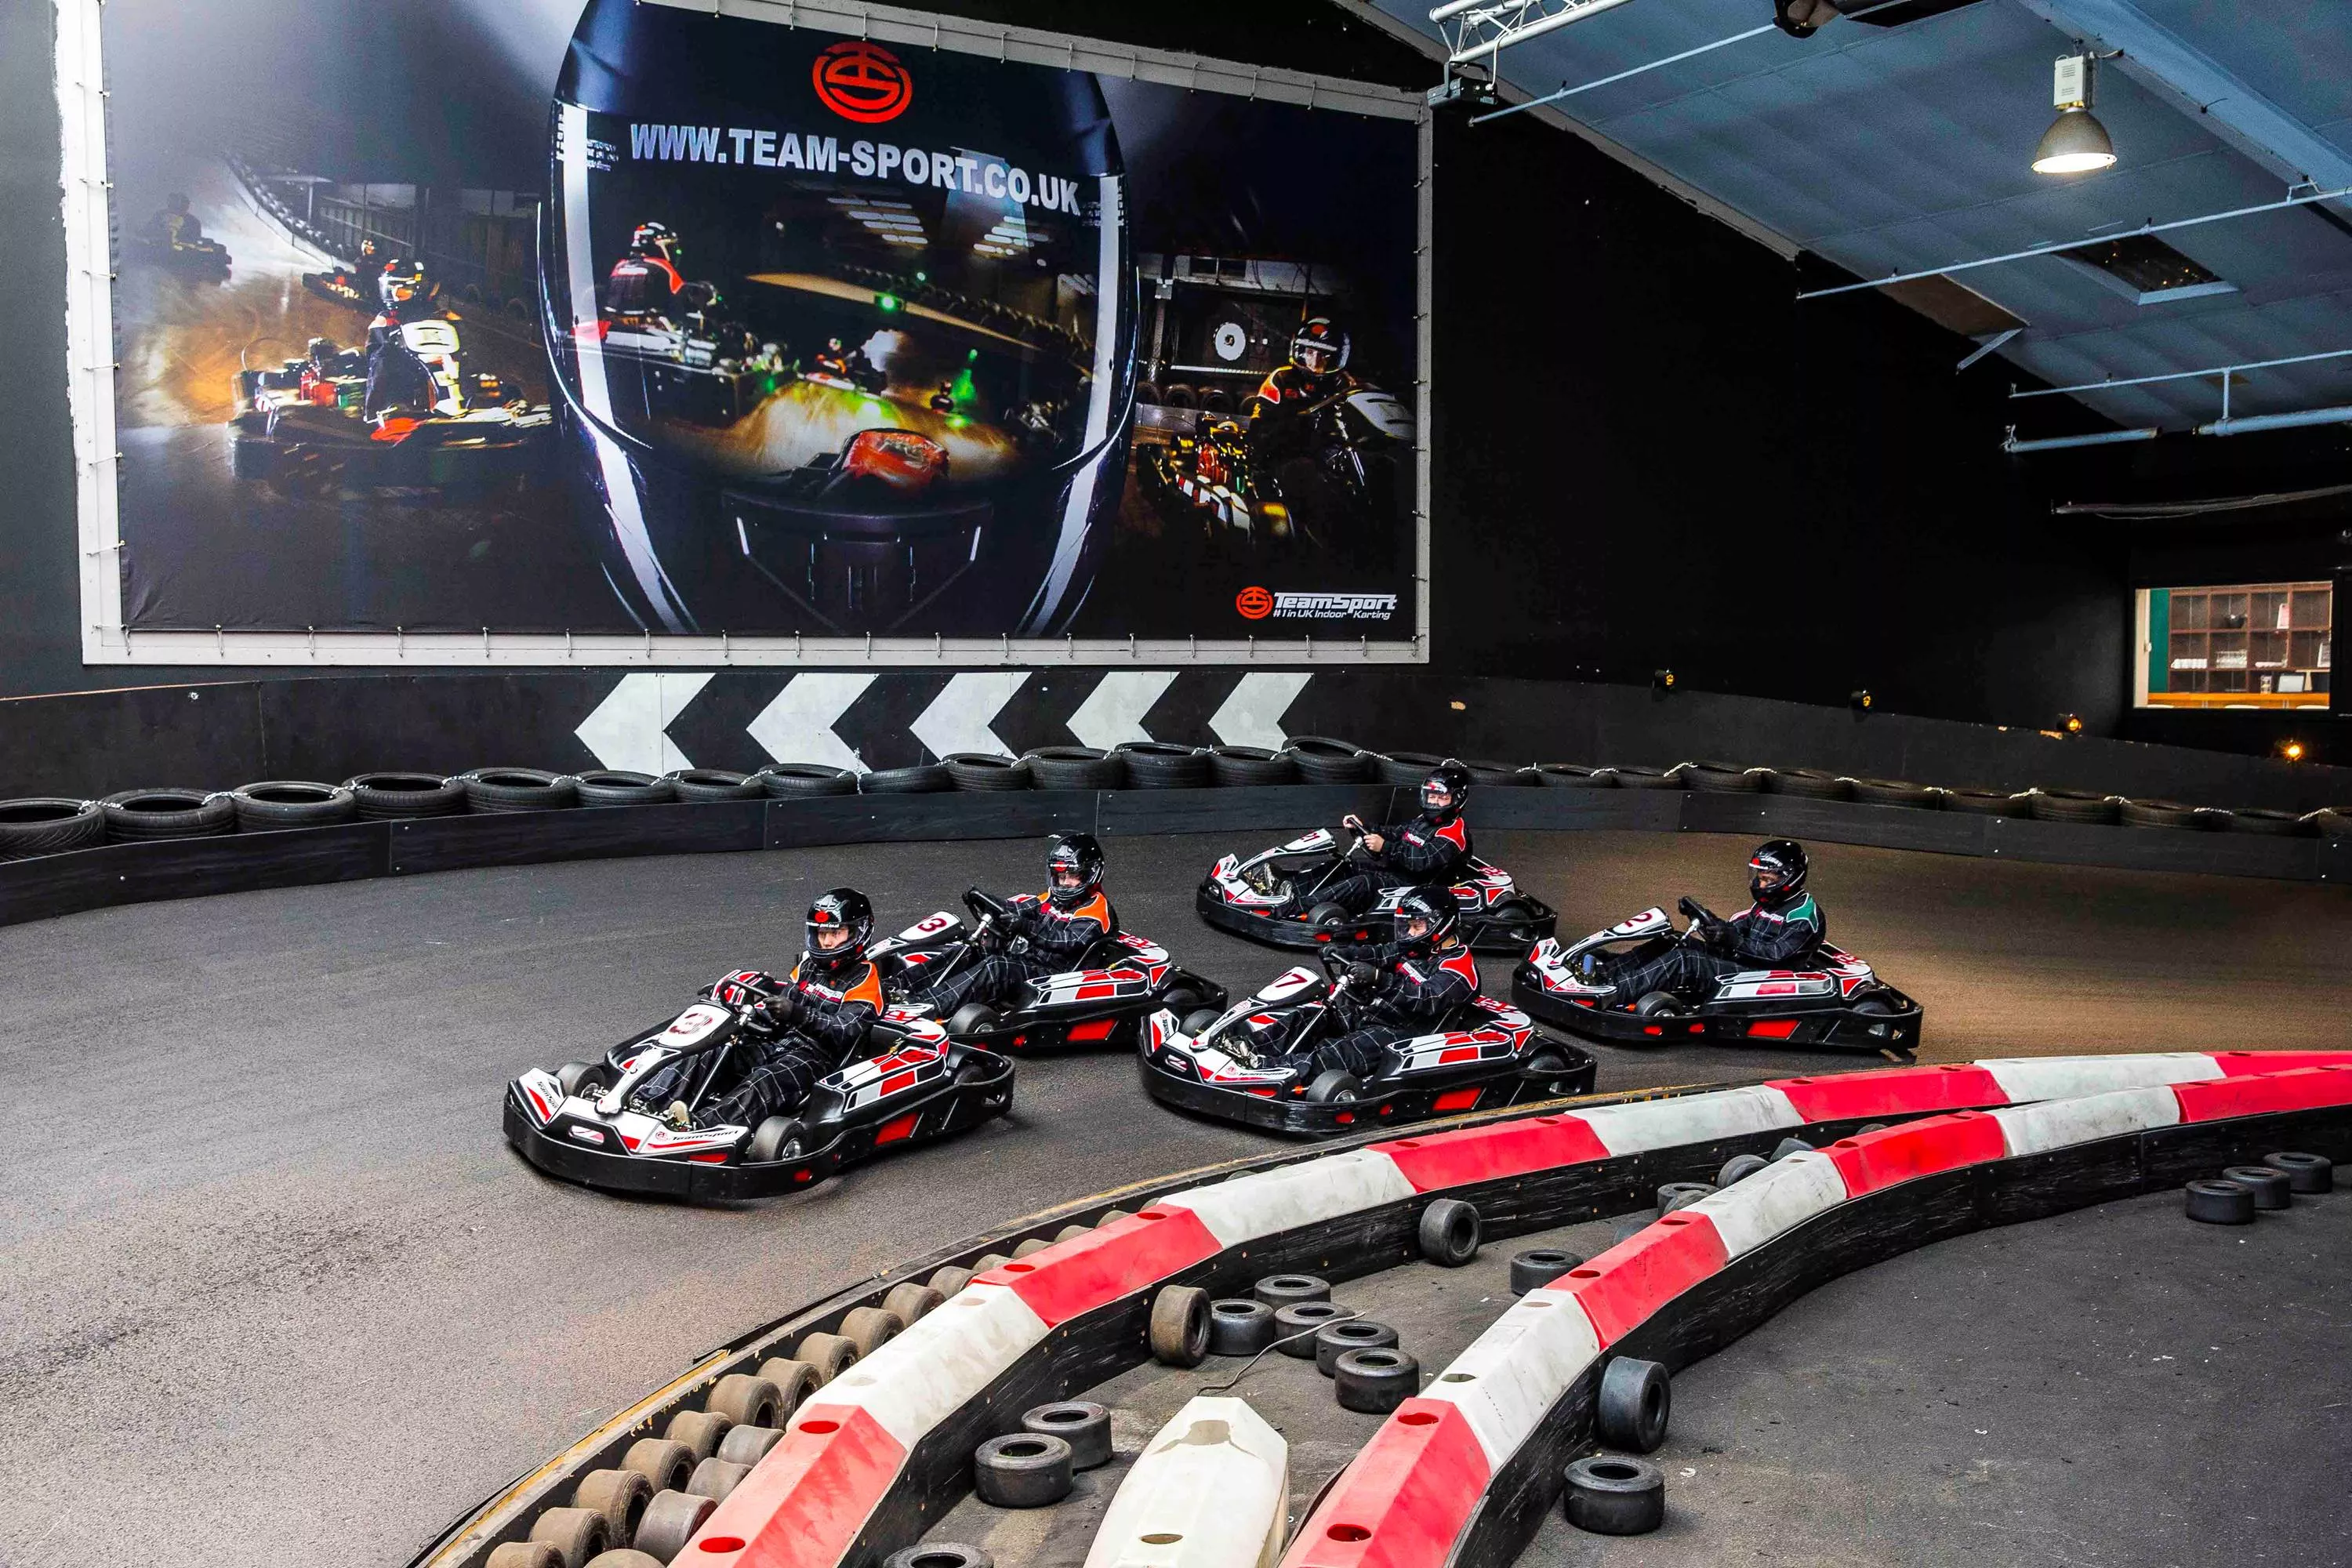 GO Karting Center in Poland, Europe | Karting - Rated 4